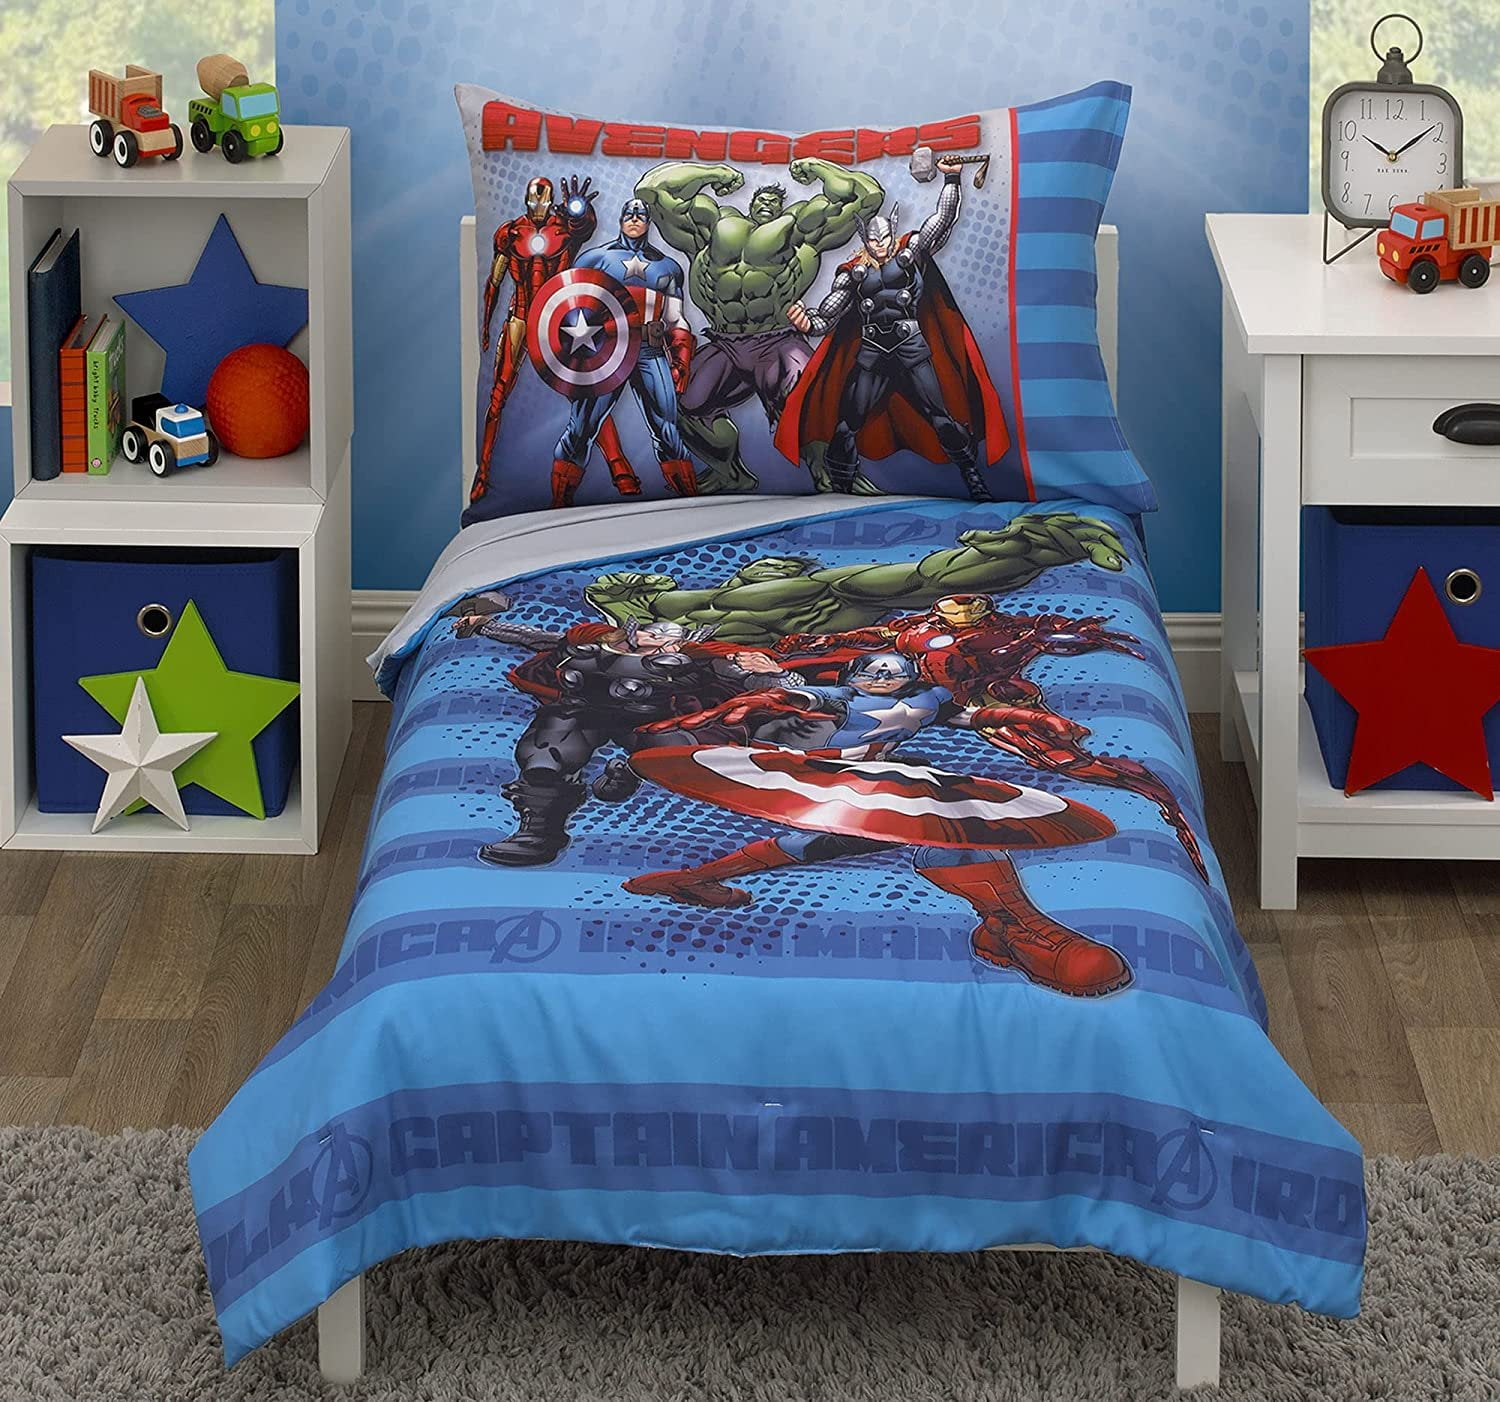 The Avengers Bed Fitted Sheet Cover 3PCS Fitted Sheet & Pillowcase Bedding Set 